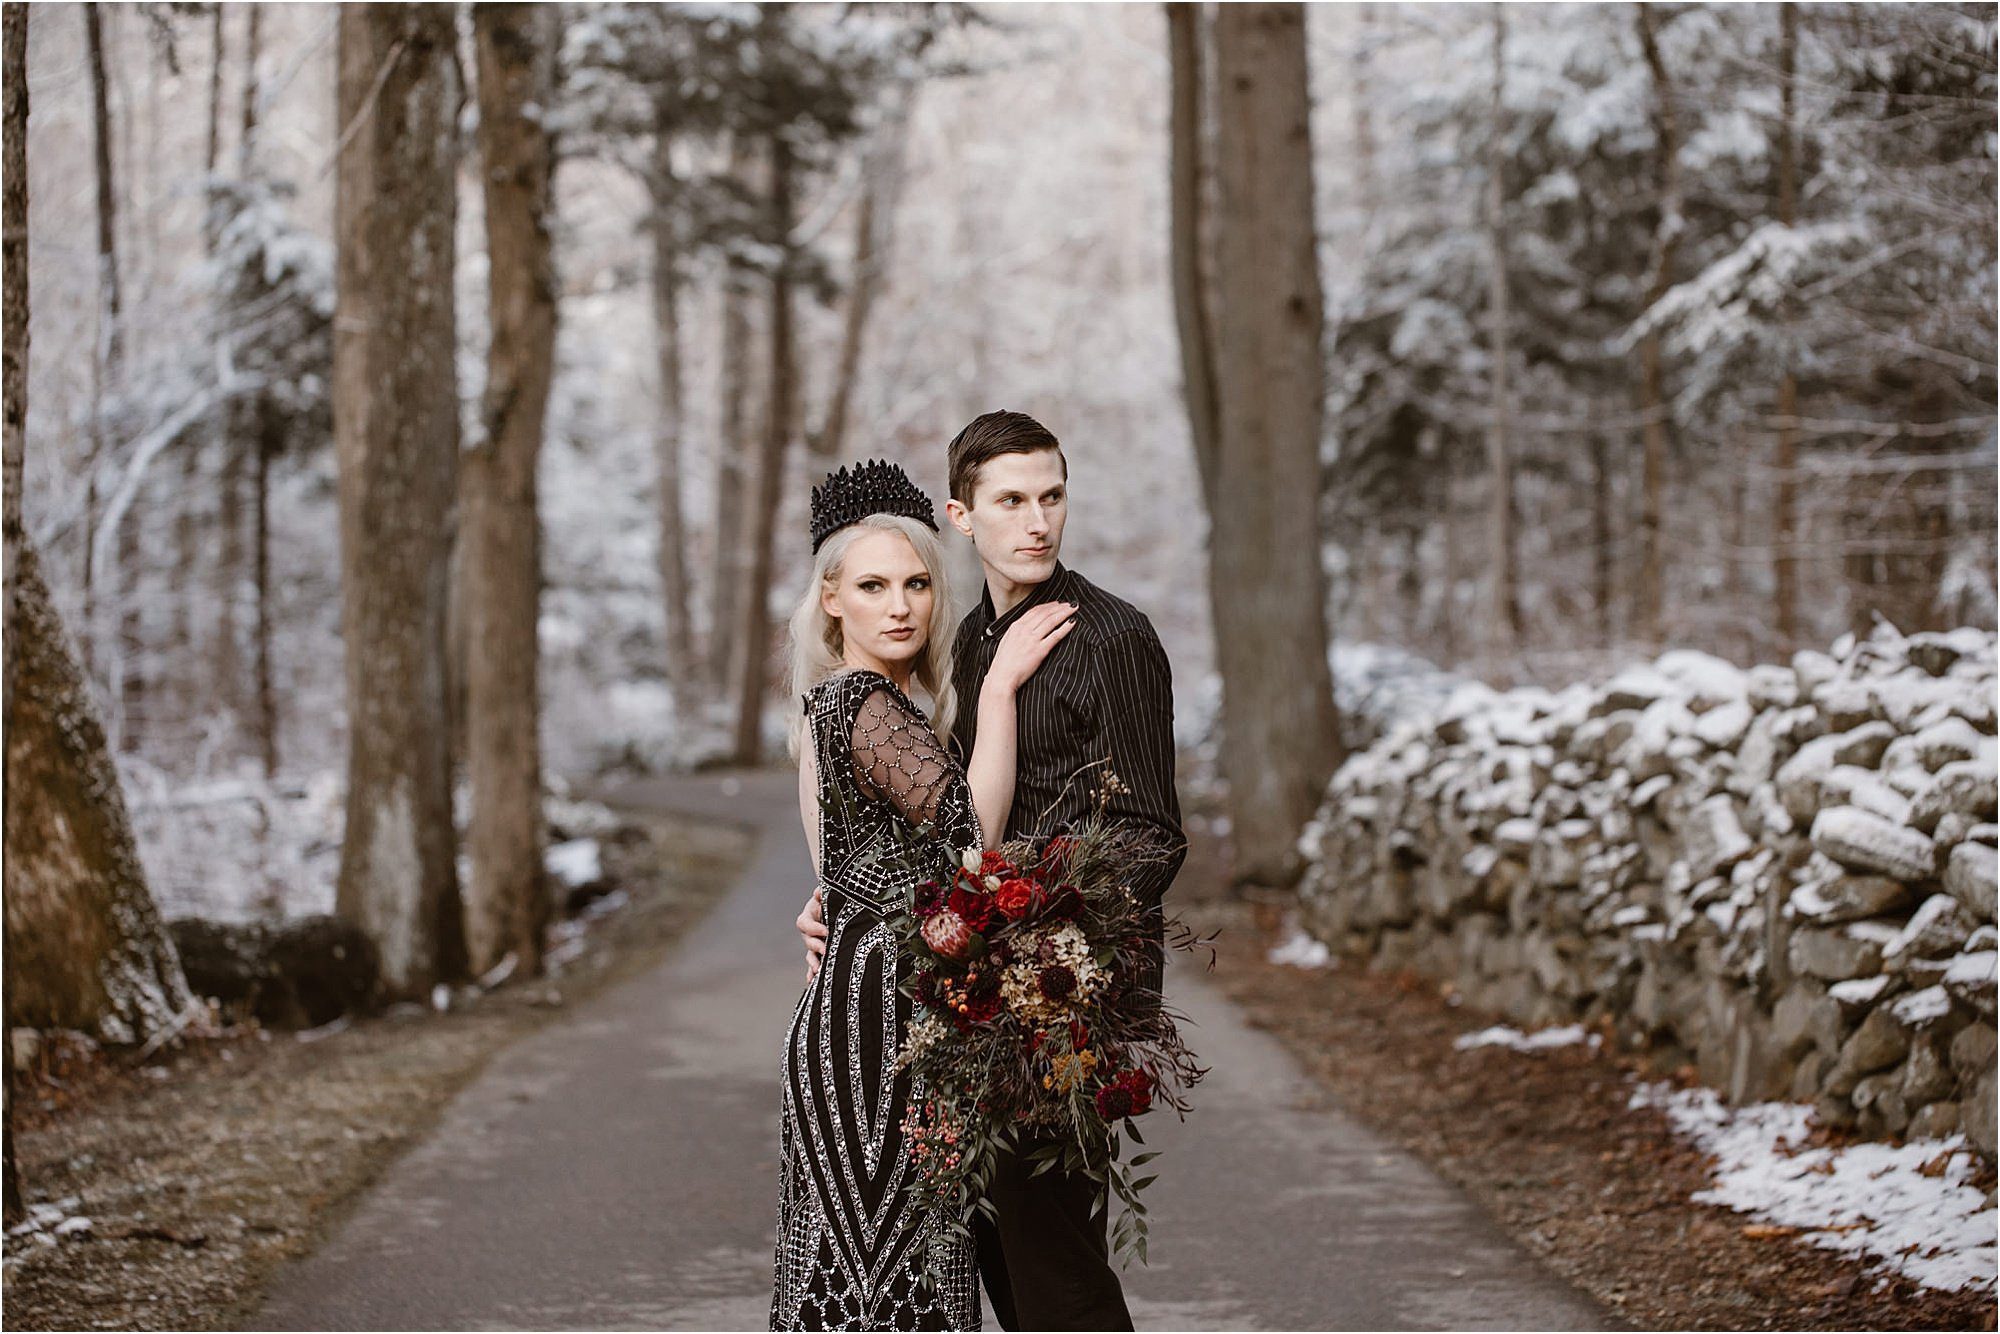 bride and groom in black wedding outfits standing in road in forest